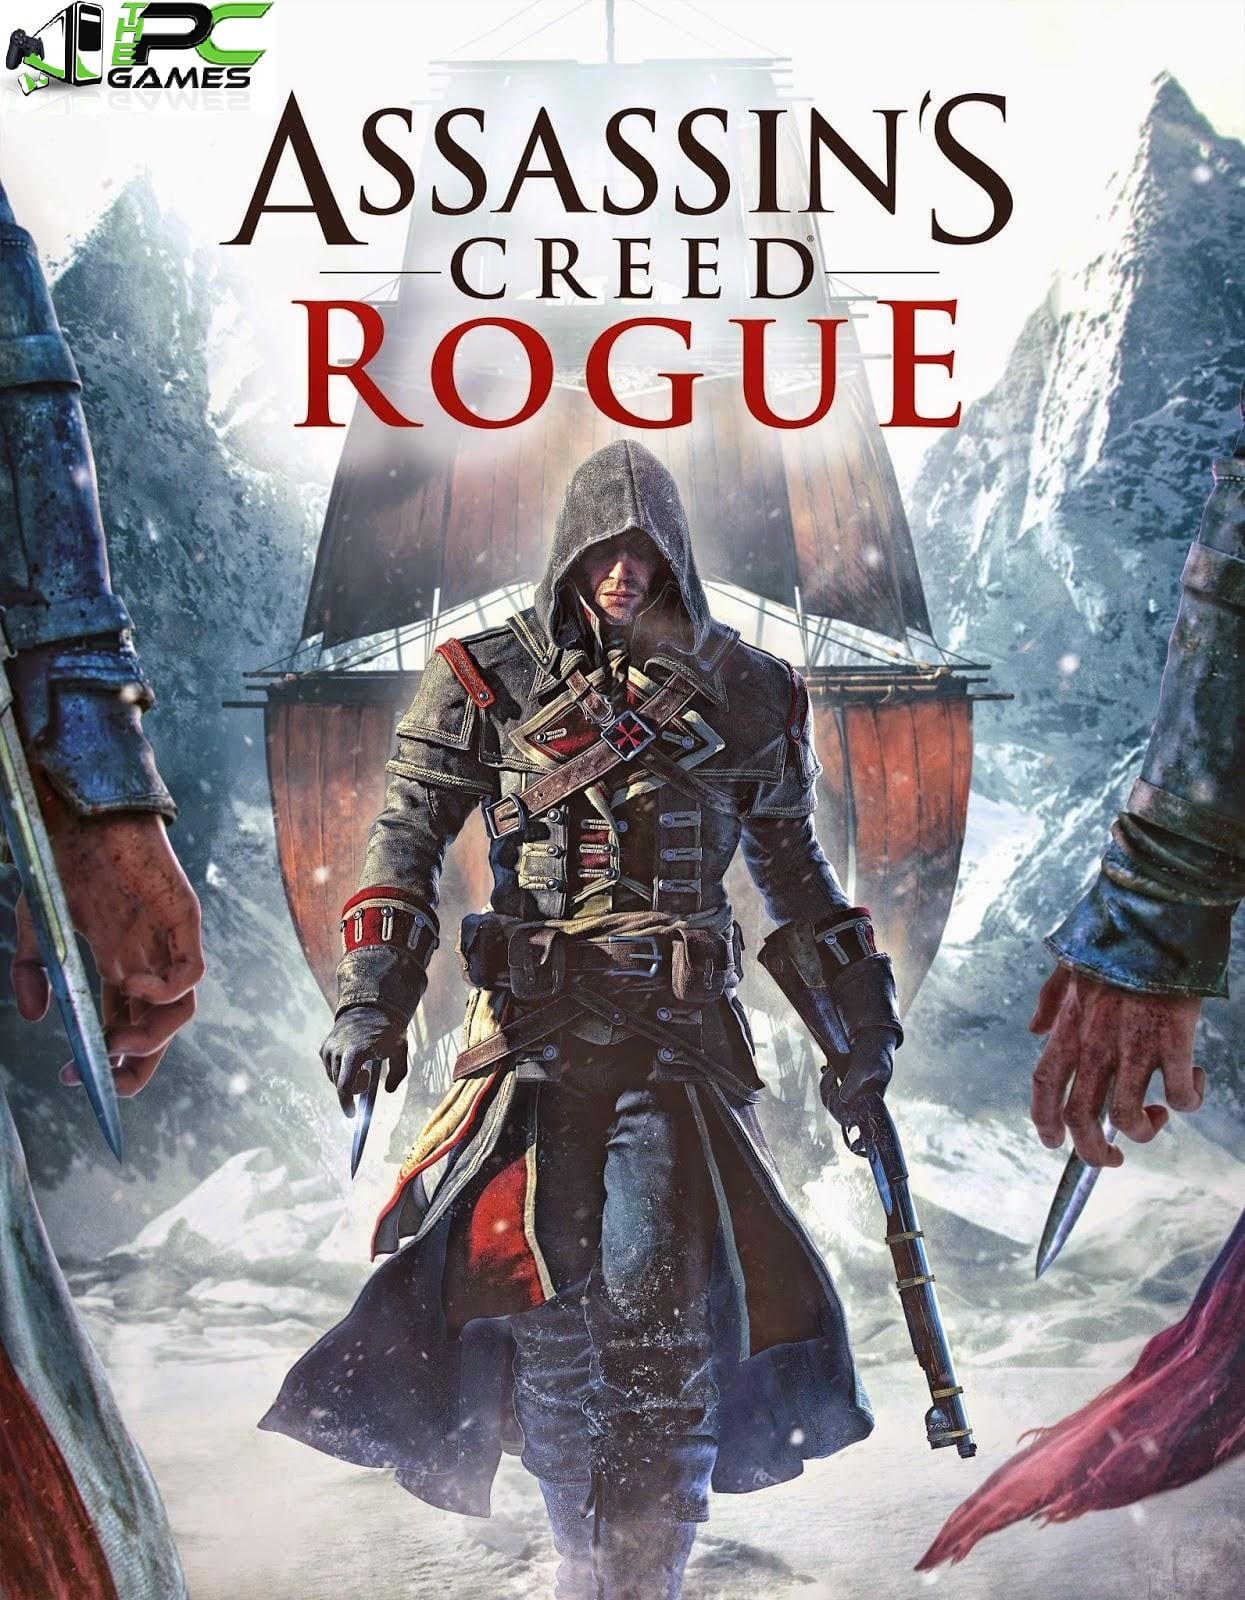 Assassin's Creed rogue pc Game